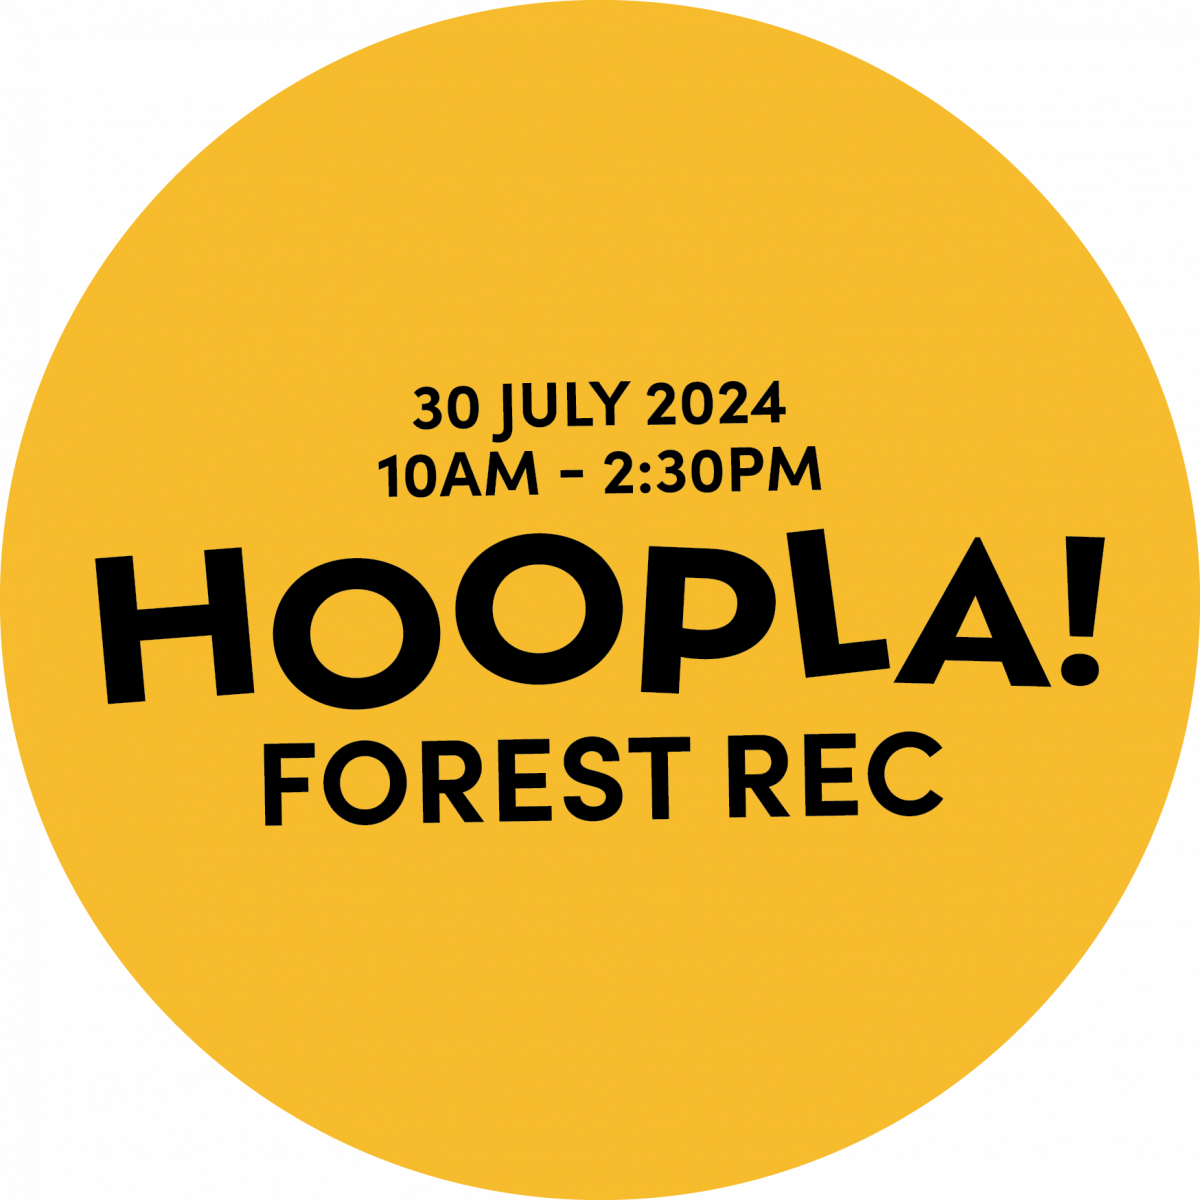 Hoopla! Forest Rec